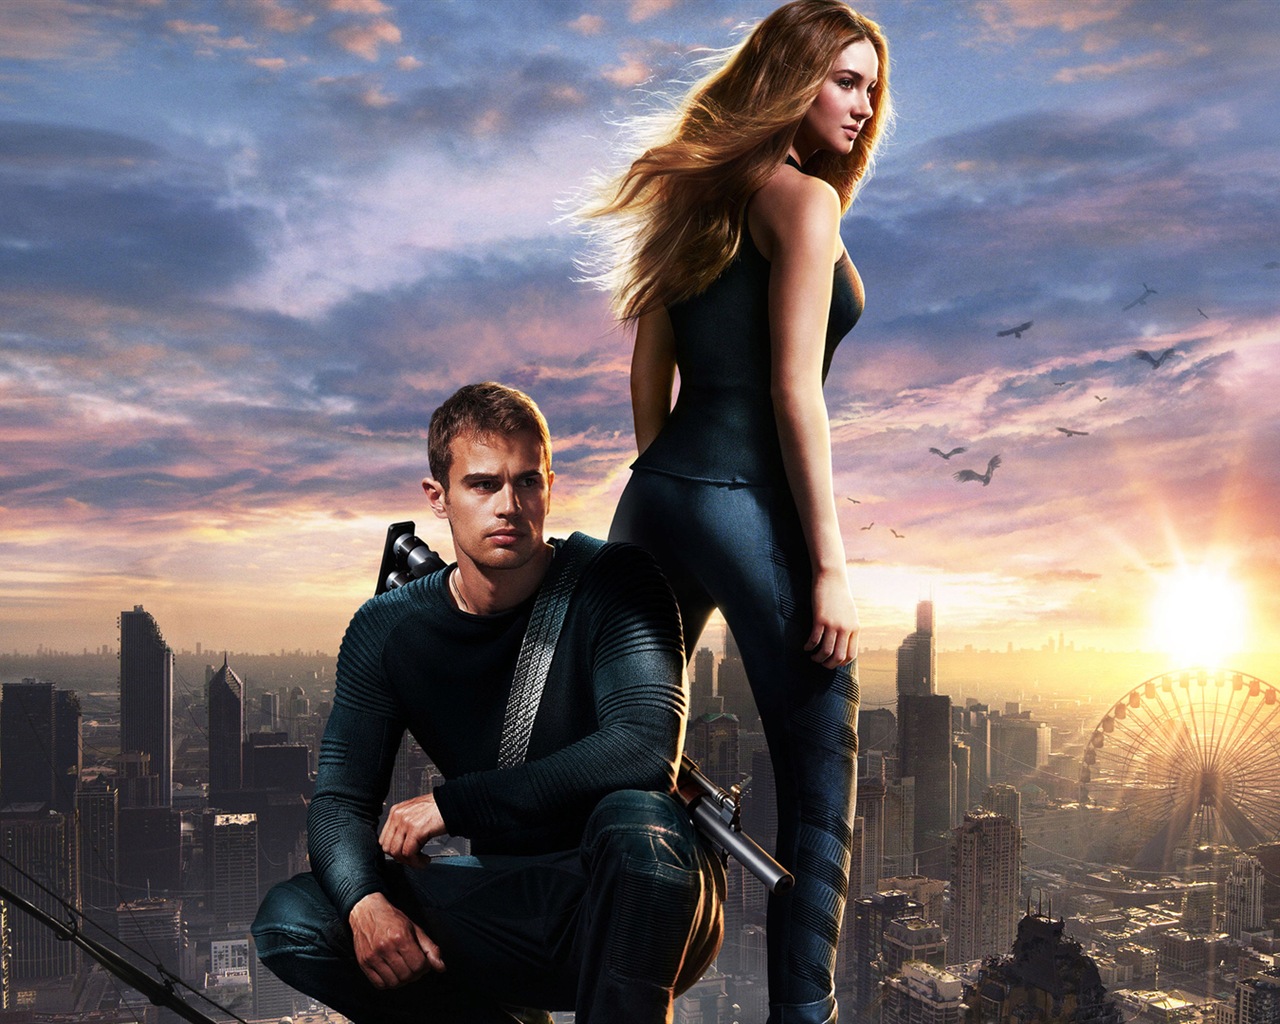 Divergent movie HD wallpapers #1 - 1280x1024